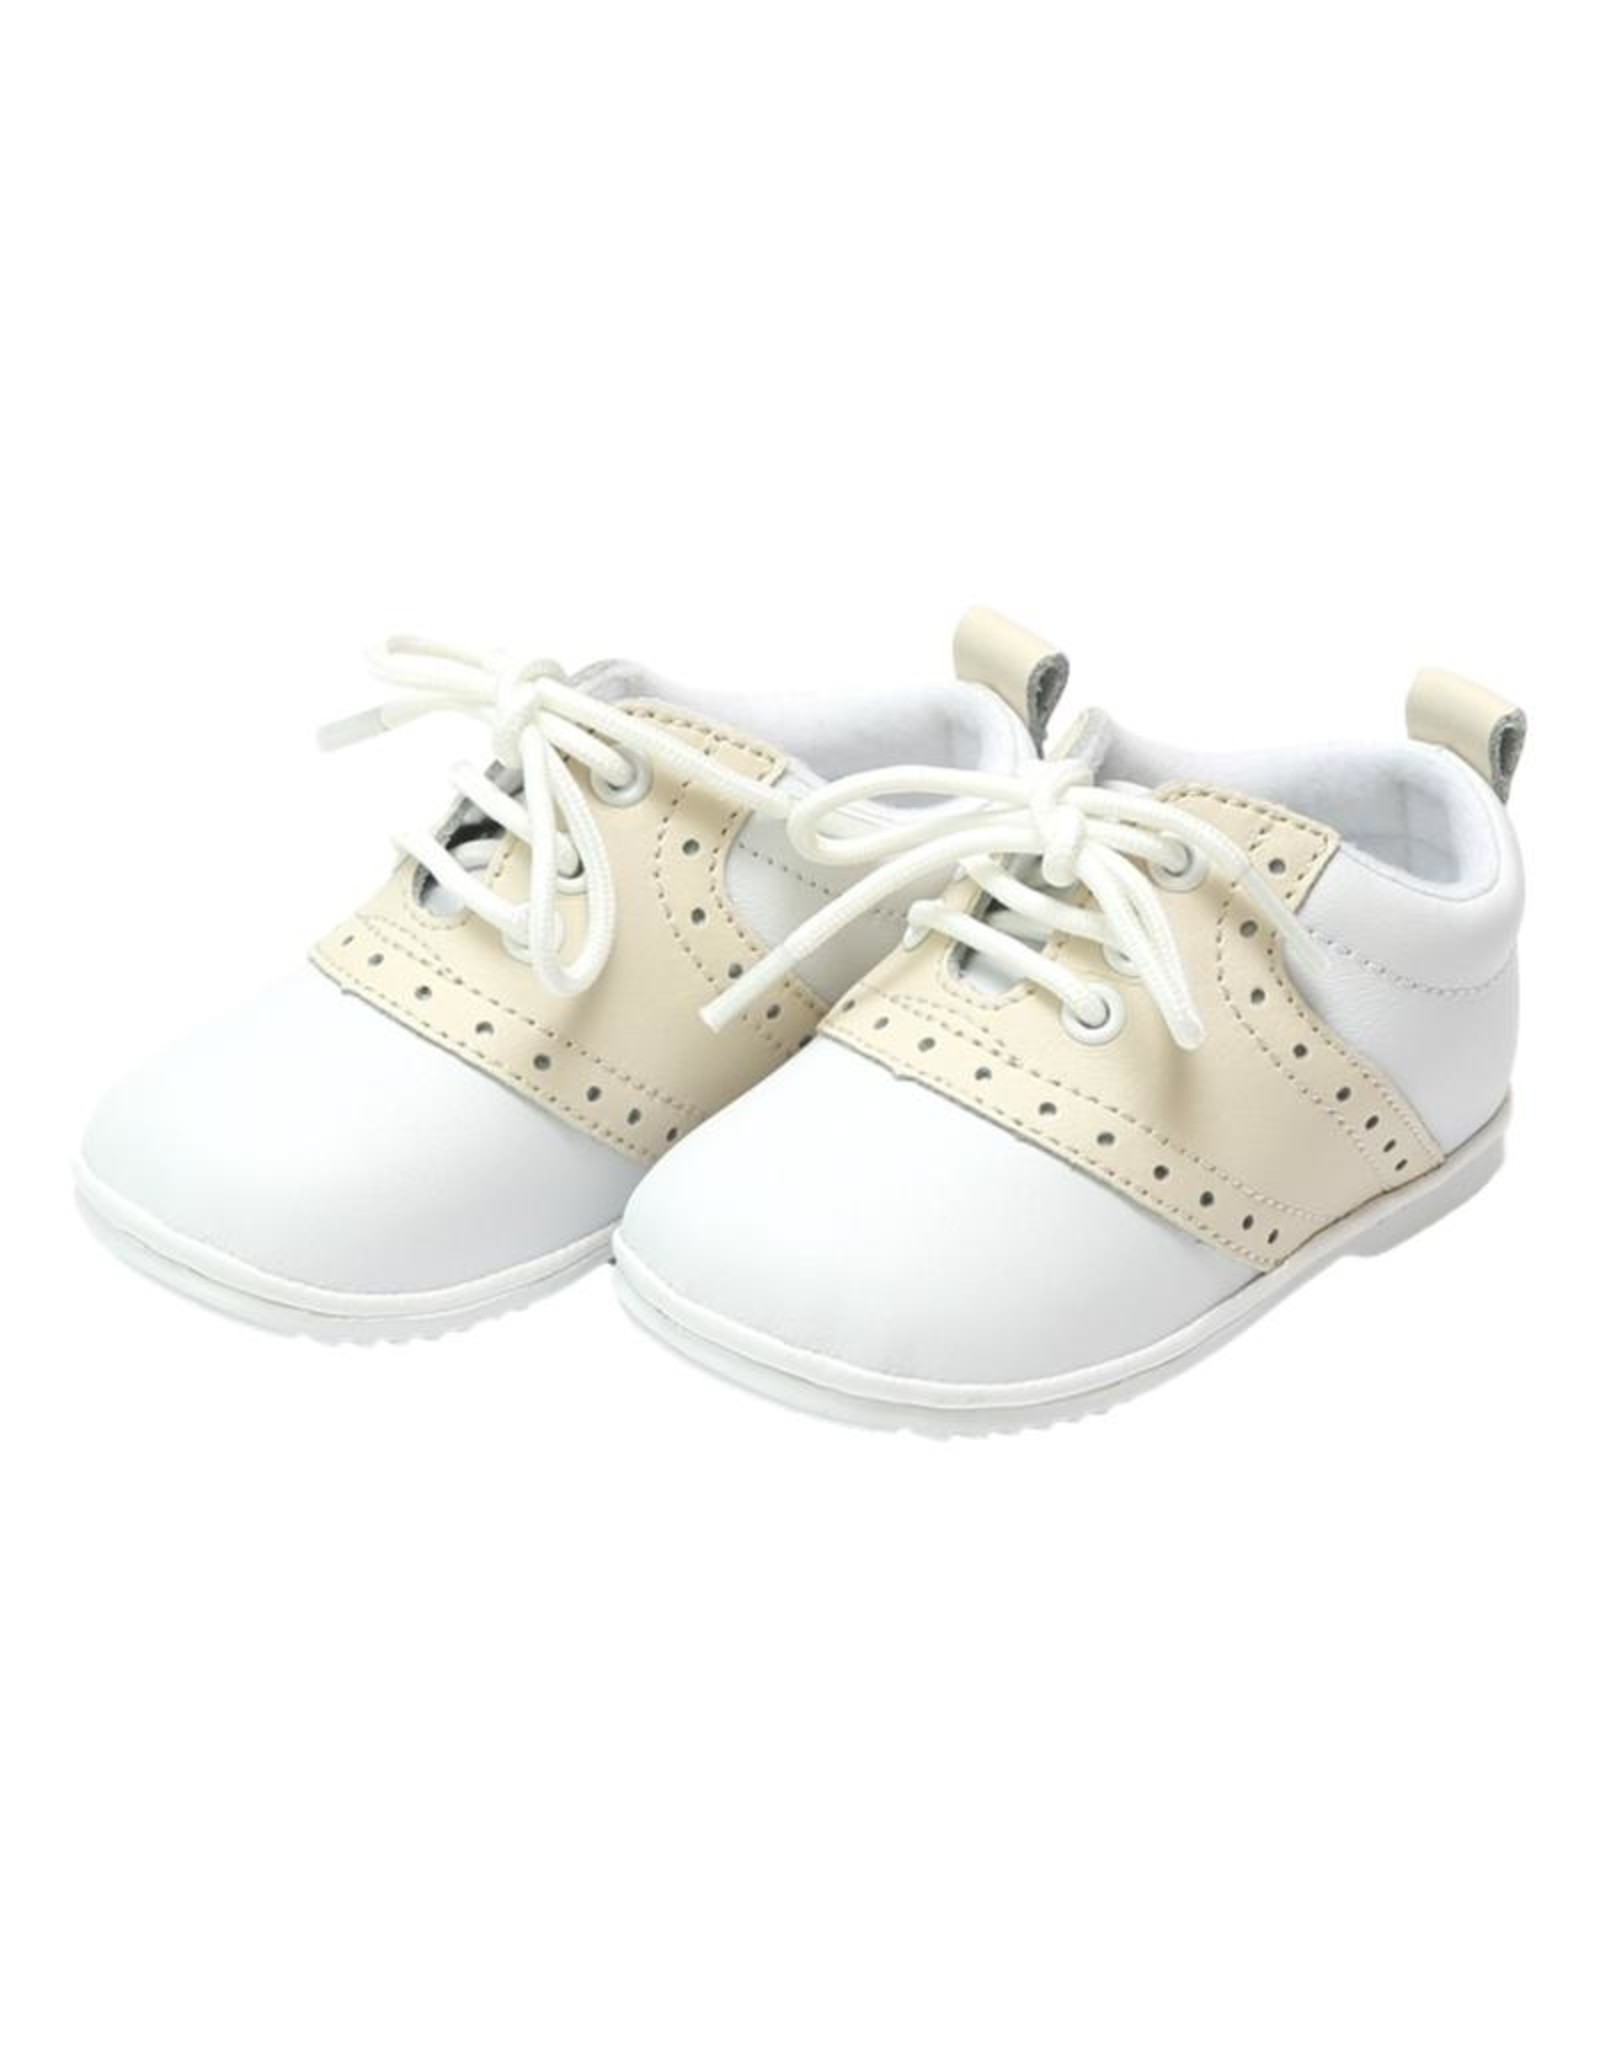 Angel by L'Amour Austin Oxford Shoe white/beige - Spoiled Sweet Bouti ...